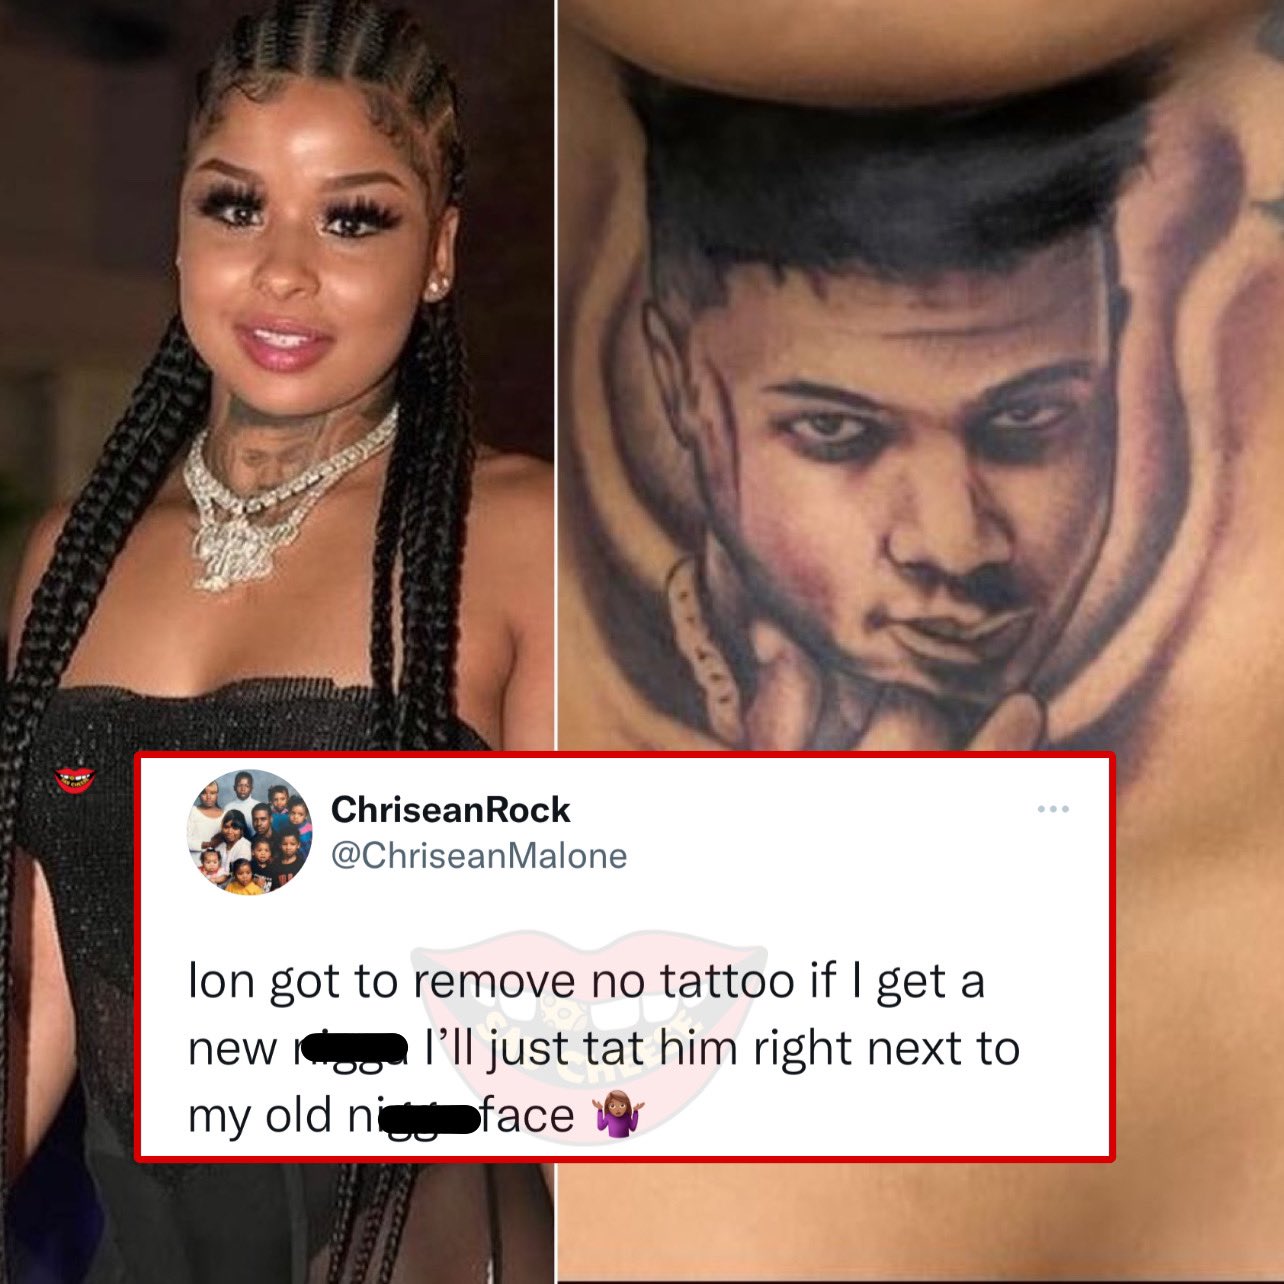 6ix9ine ROAST Blueface For Getting His Jewelers Name Tattoo On His Head   YouTube